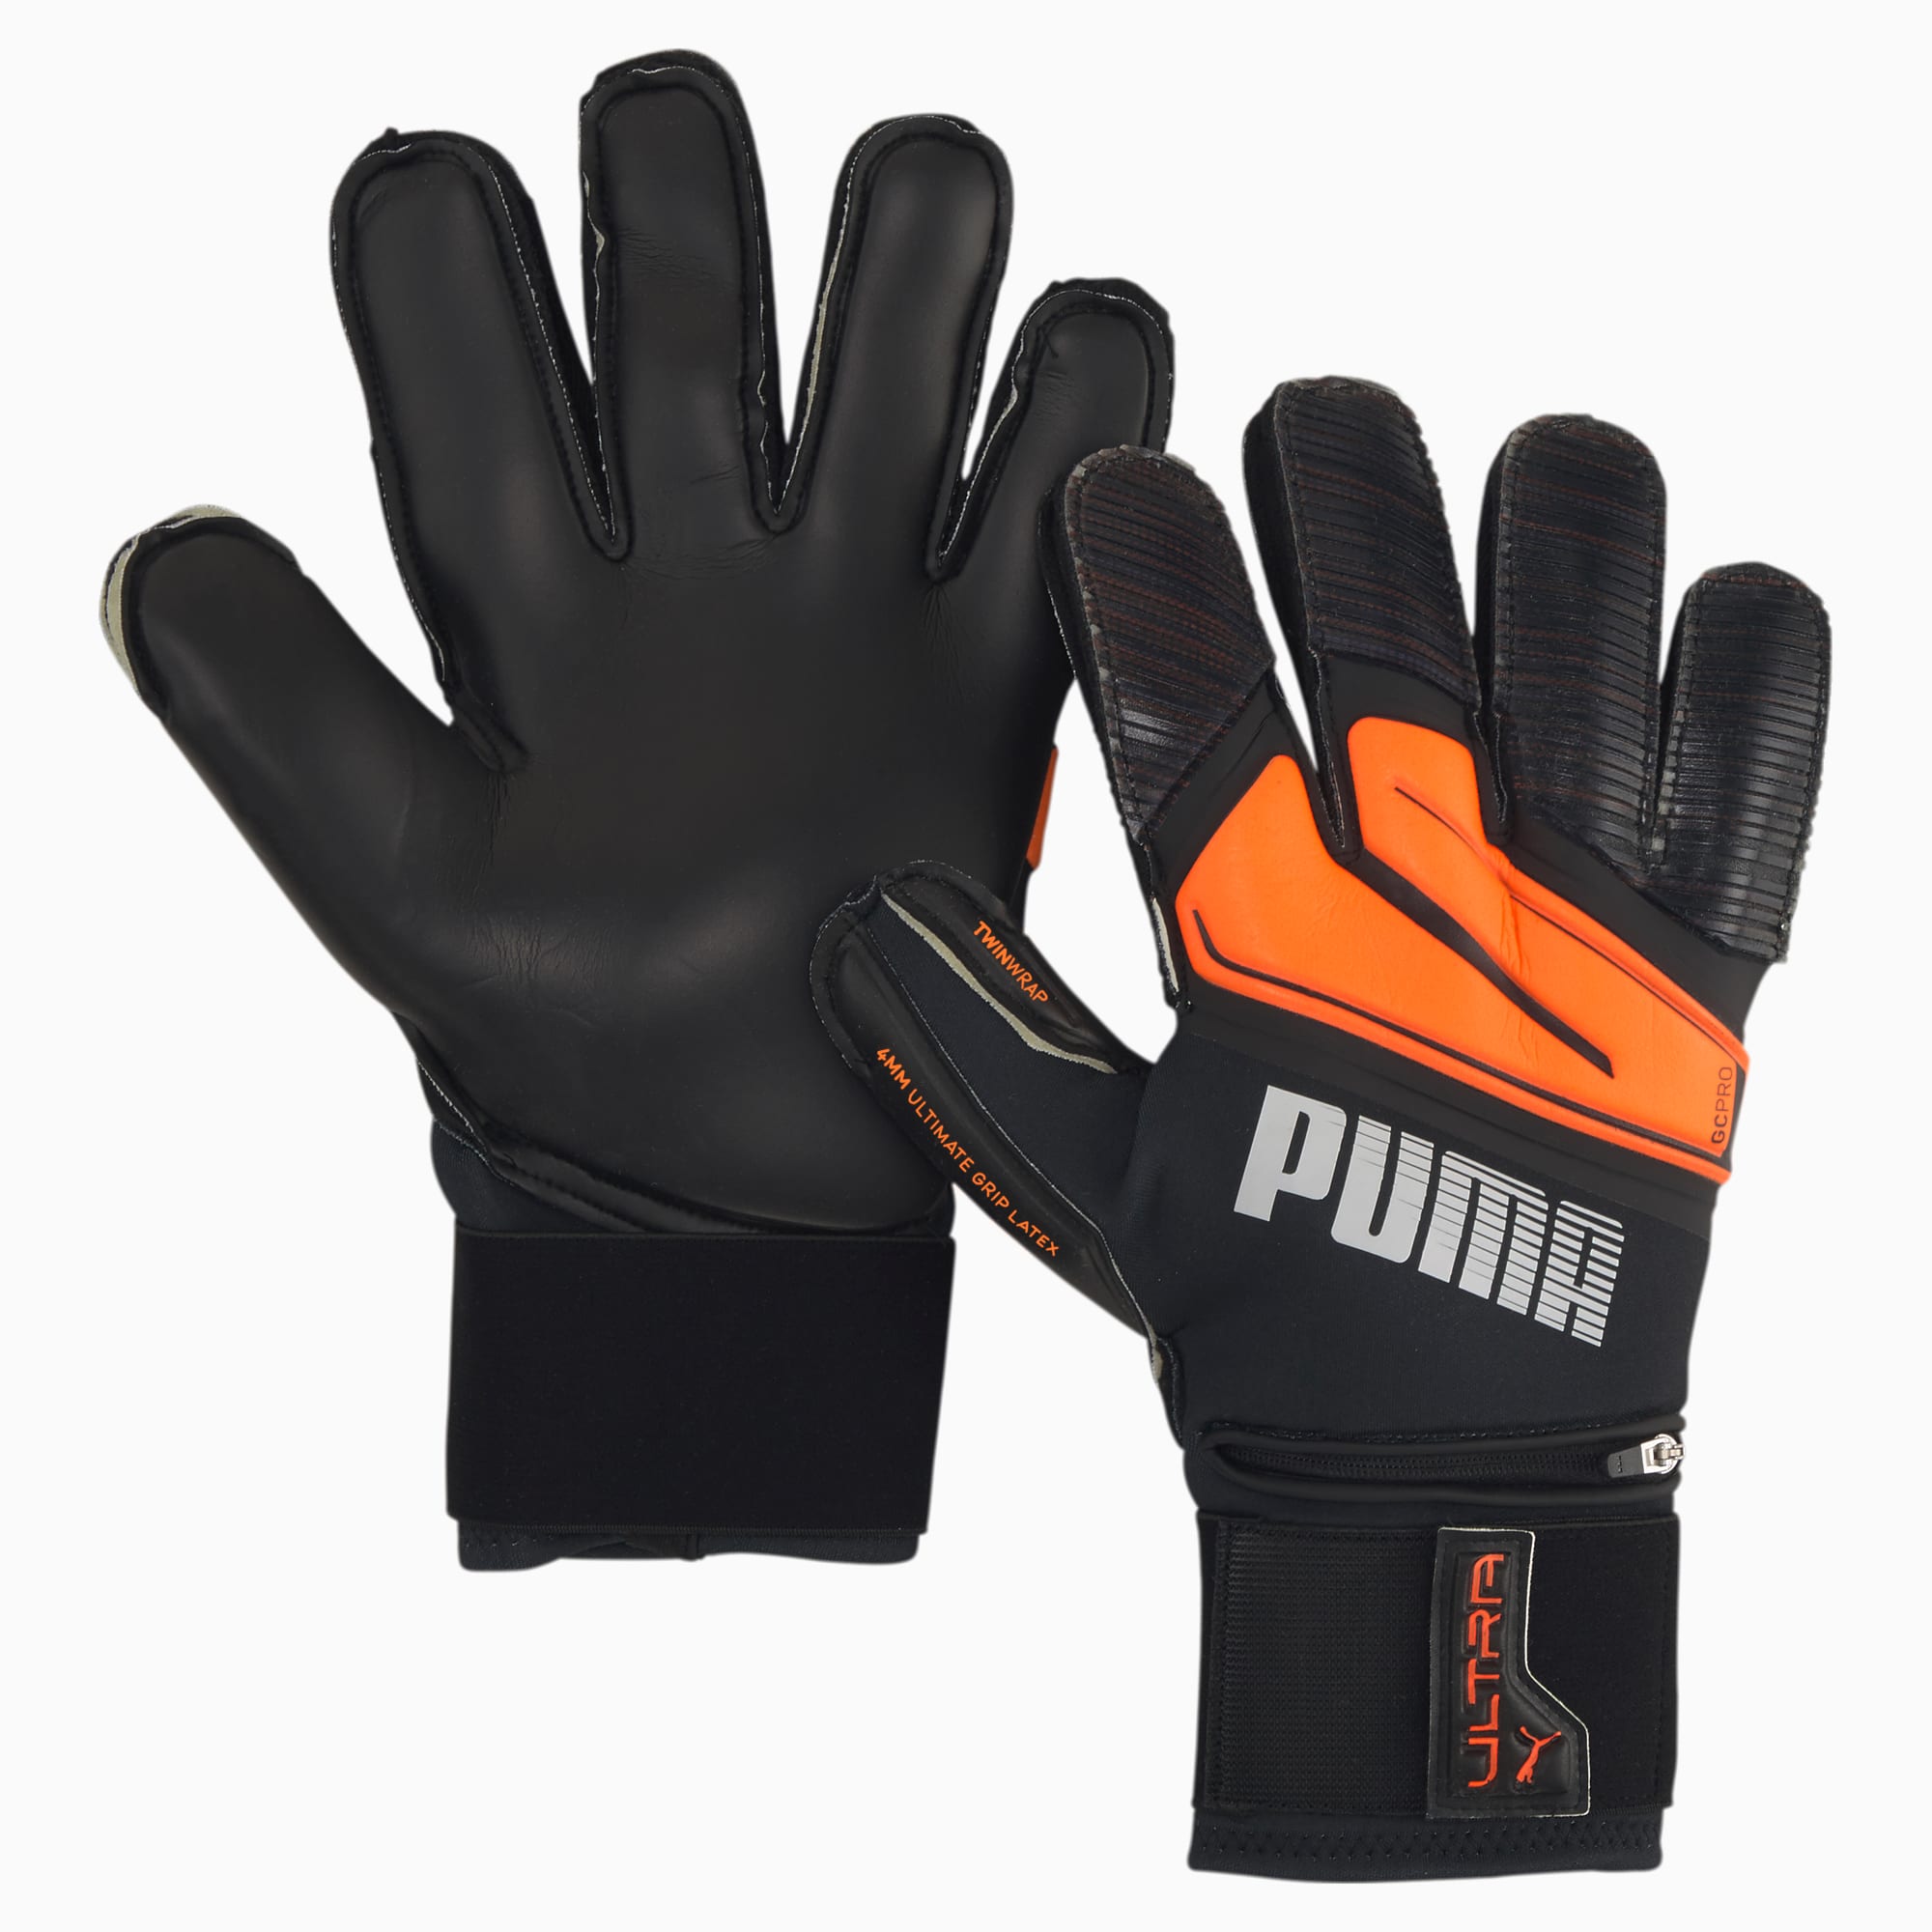 ULTRA Protect 1 RC Goalkeeper Gloves 